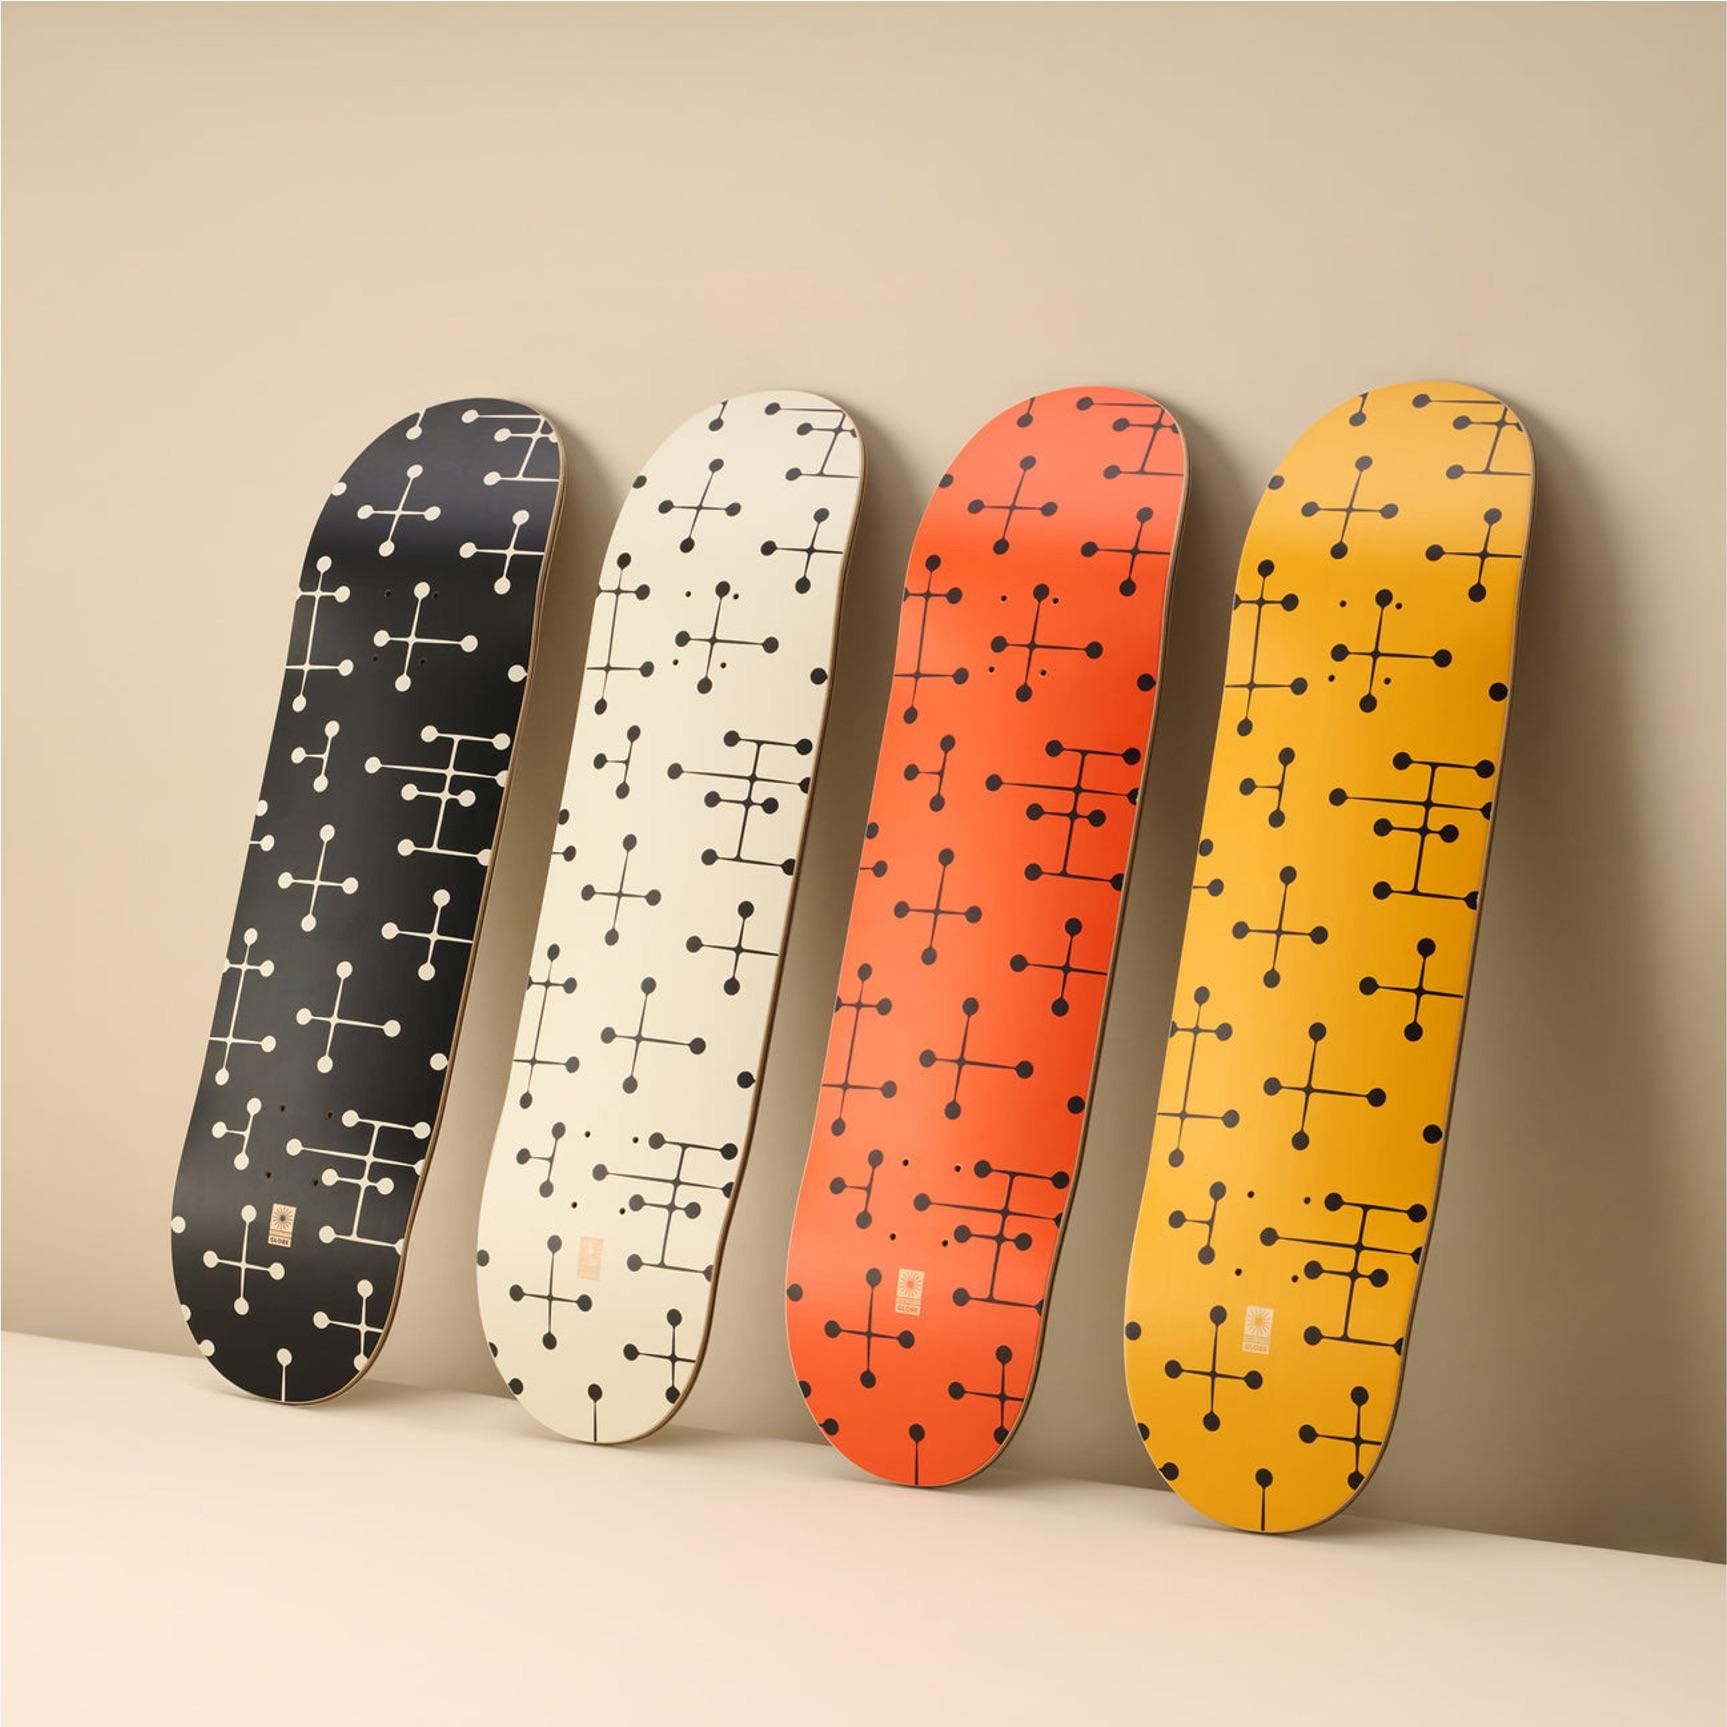 Charles and Ray Eames
Dot Pattern Skateboard Deck, 2023
Maple wood. Raised-ink print of Dot Pattern on bottom with a dark maple veneer and archival print on top.
31 1/2 × 7 9/10 in  80 × 20 cm